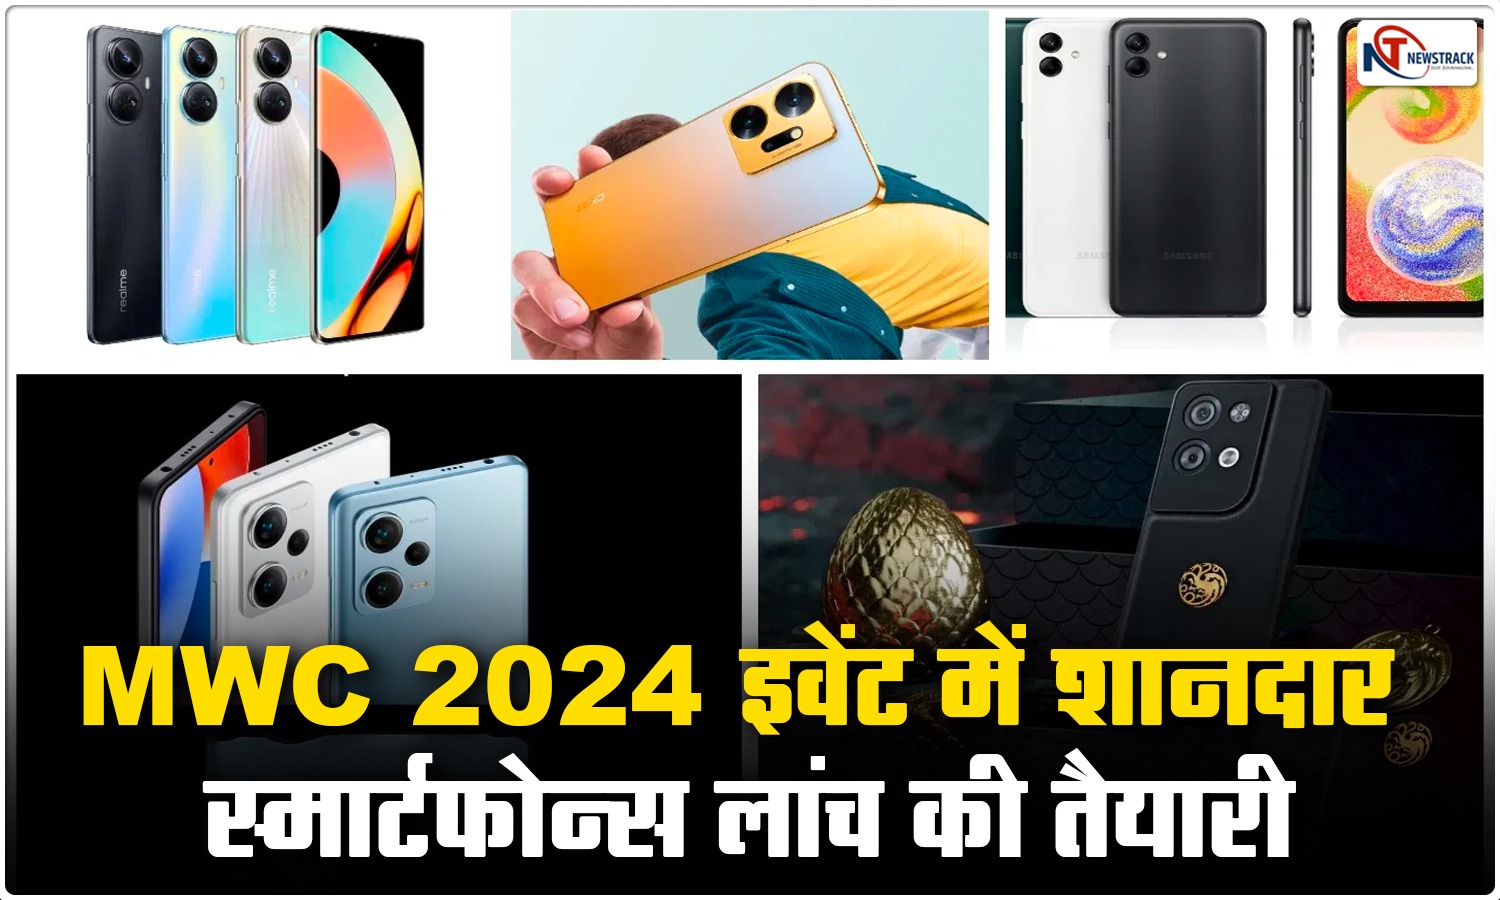 MWC 2024 26 Febuary Latest Upcoming Smartphones